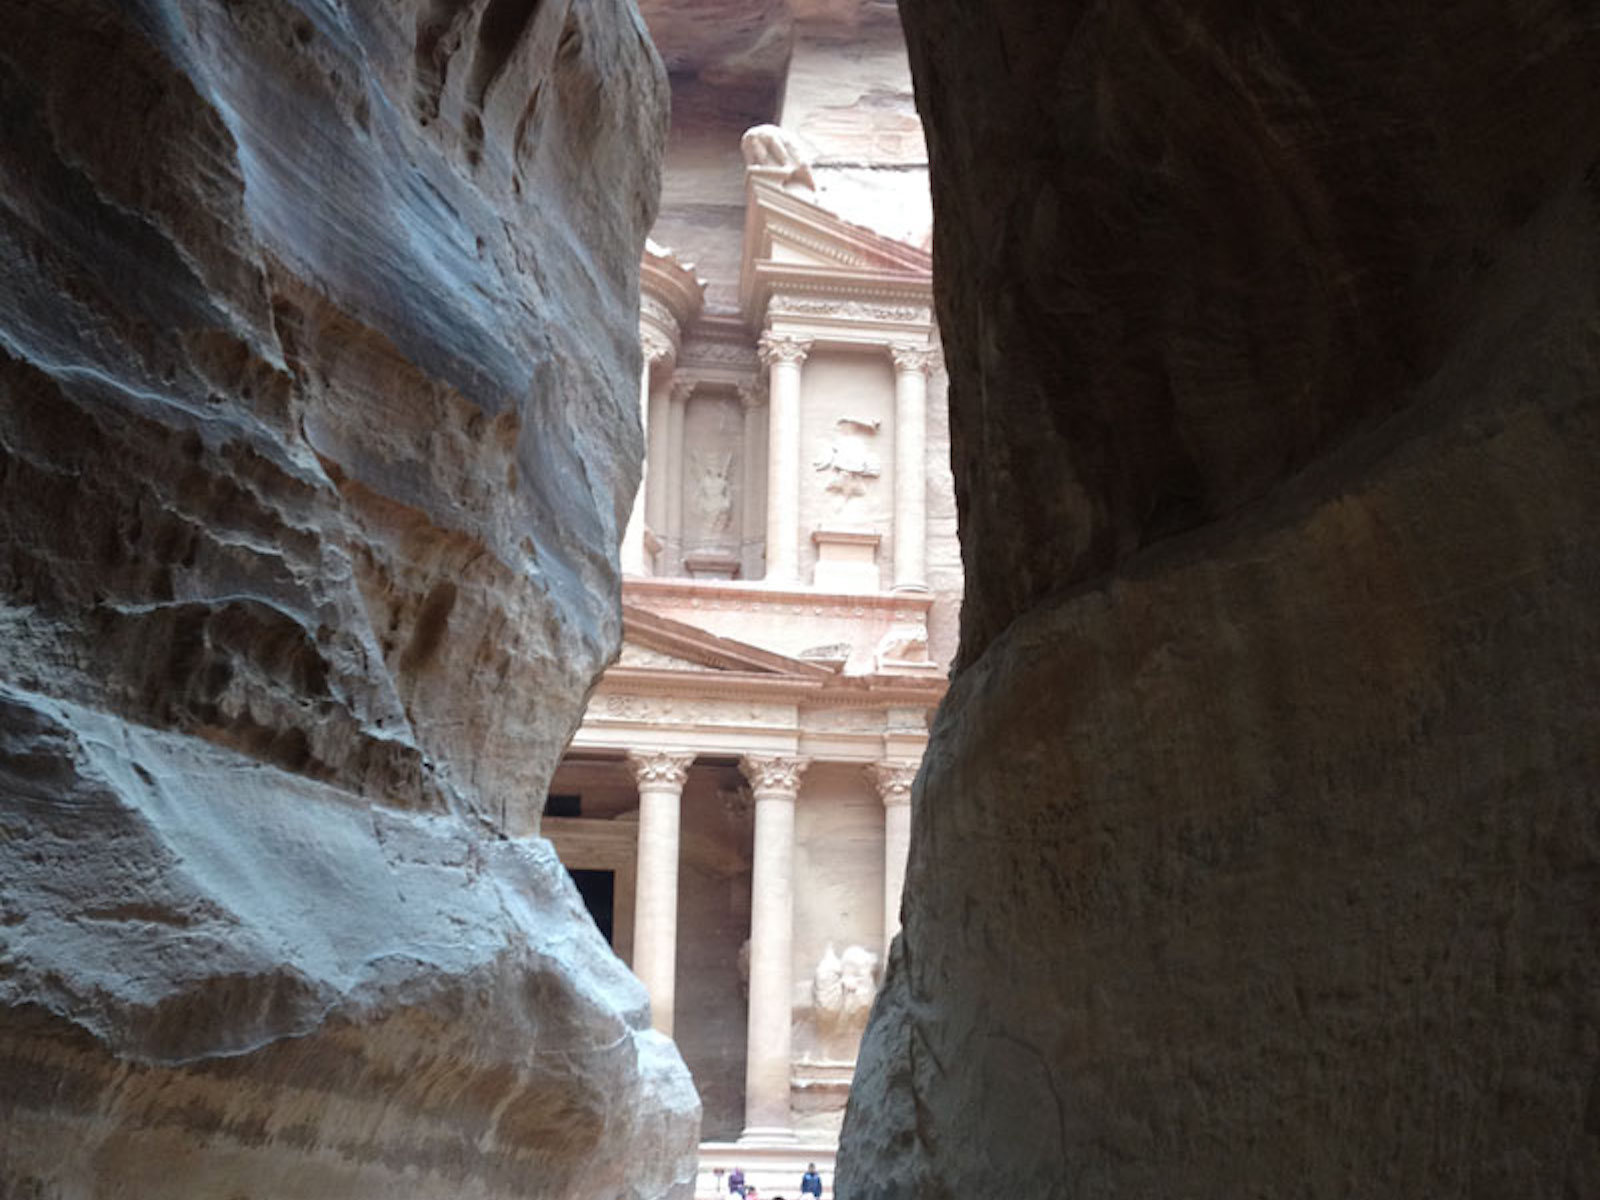 The best ways to fly to the Middle East using points & miles to visit Petra